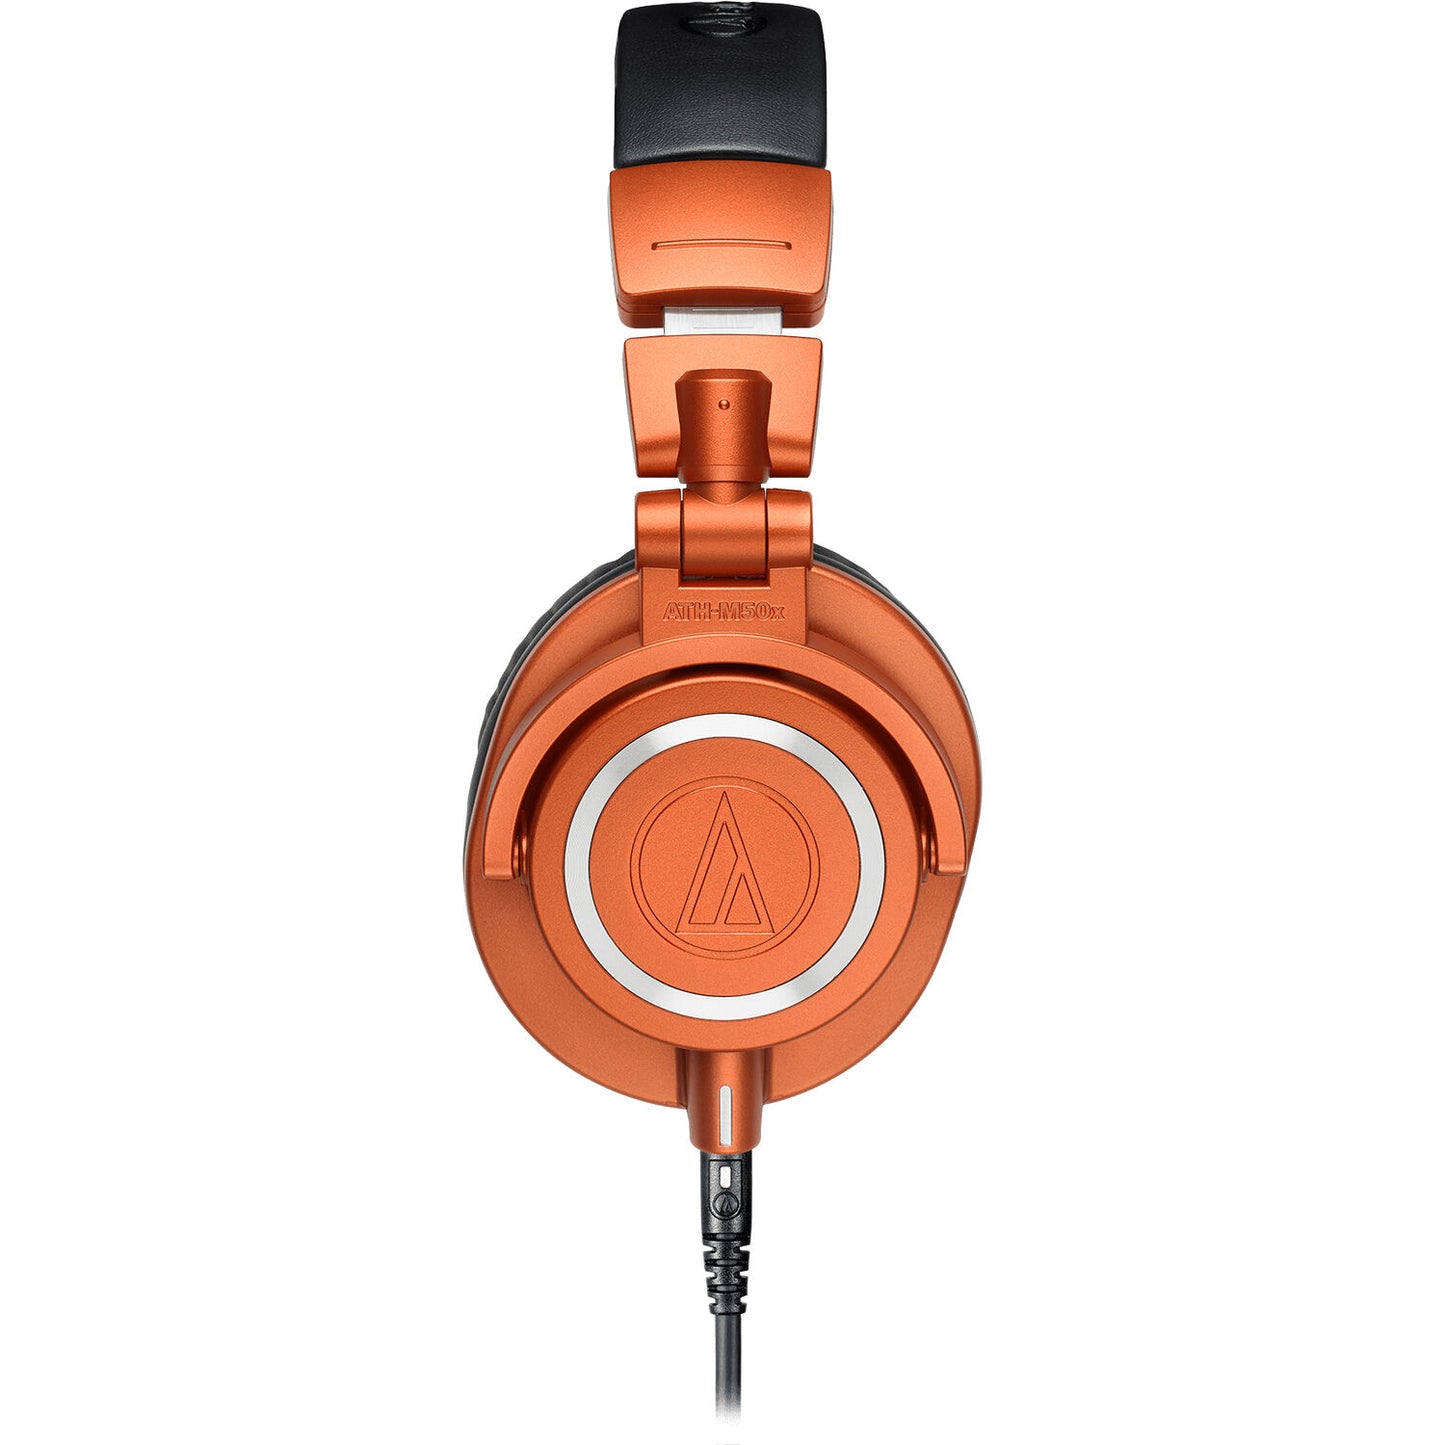 Audio Technica ATH-M50xMO Professional Studio Monitor Headphones (LIMITED EDITION Lantern Glow) with 3 Detachable Cables